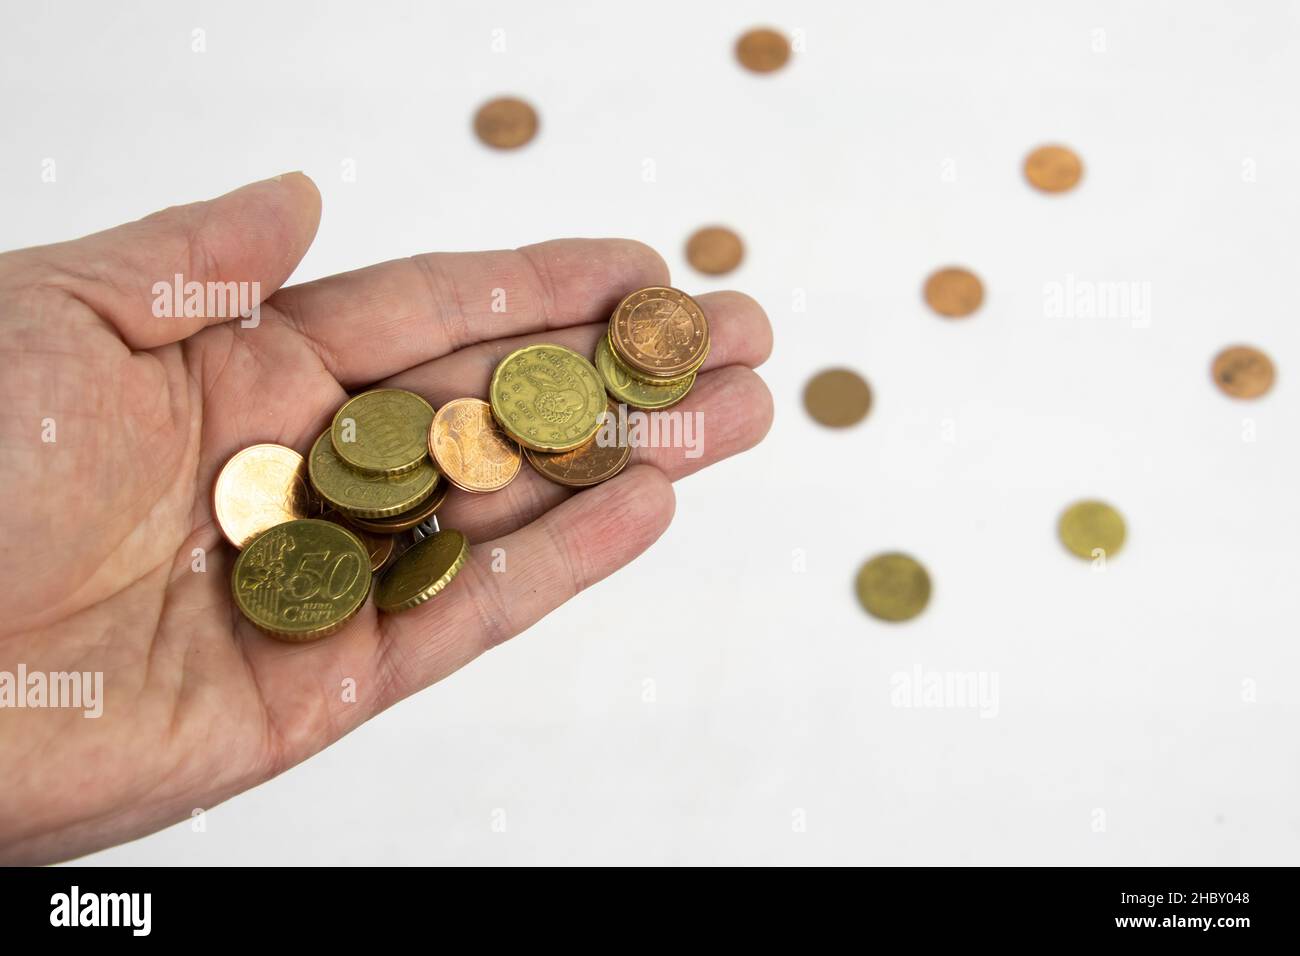 Hand holding euro coins isolated on white background, concept of poverty Stock Photo